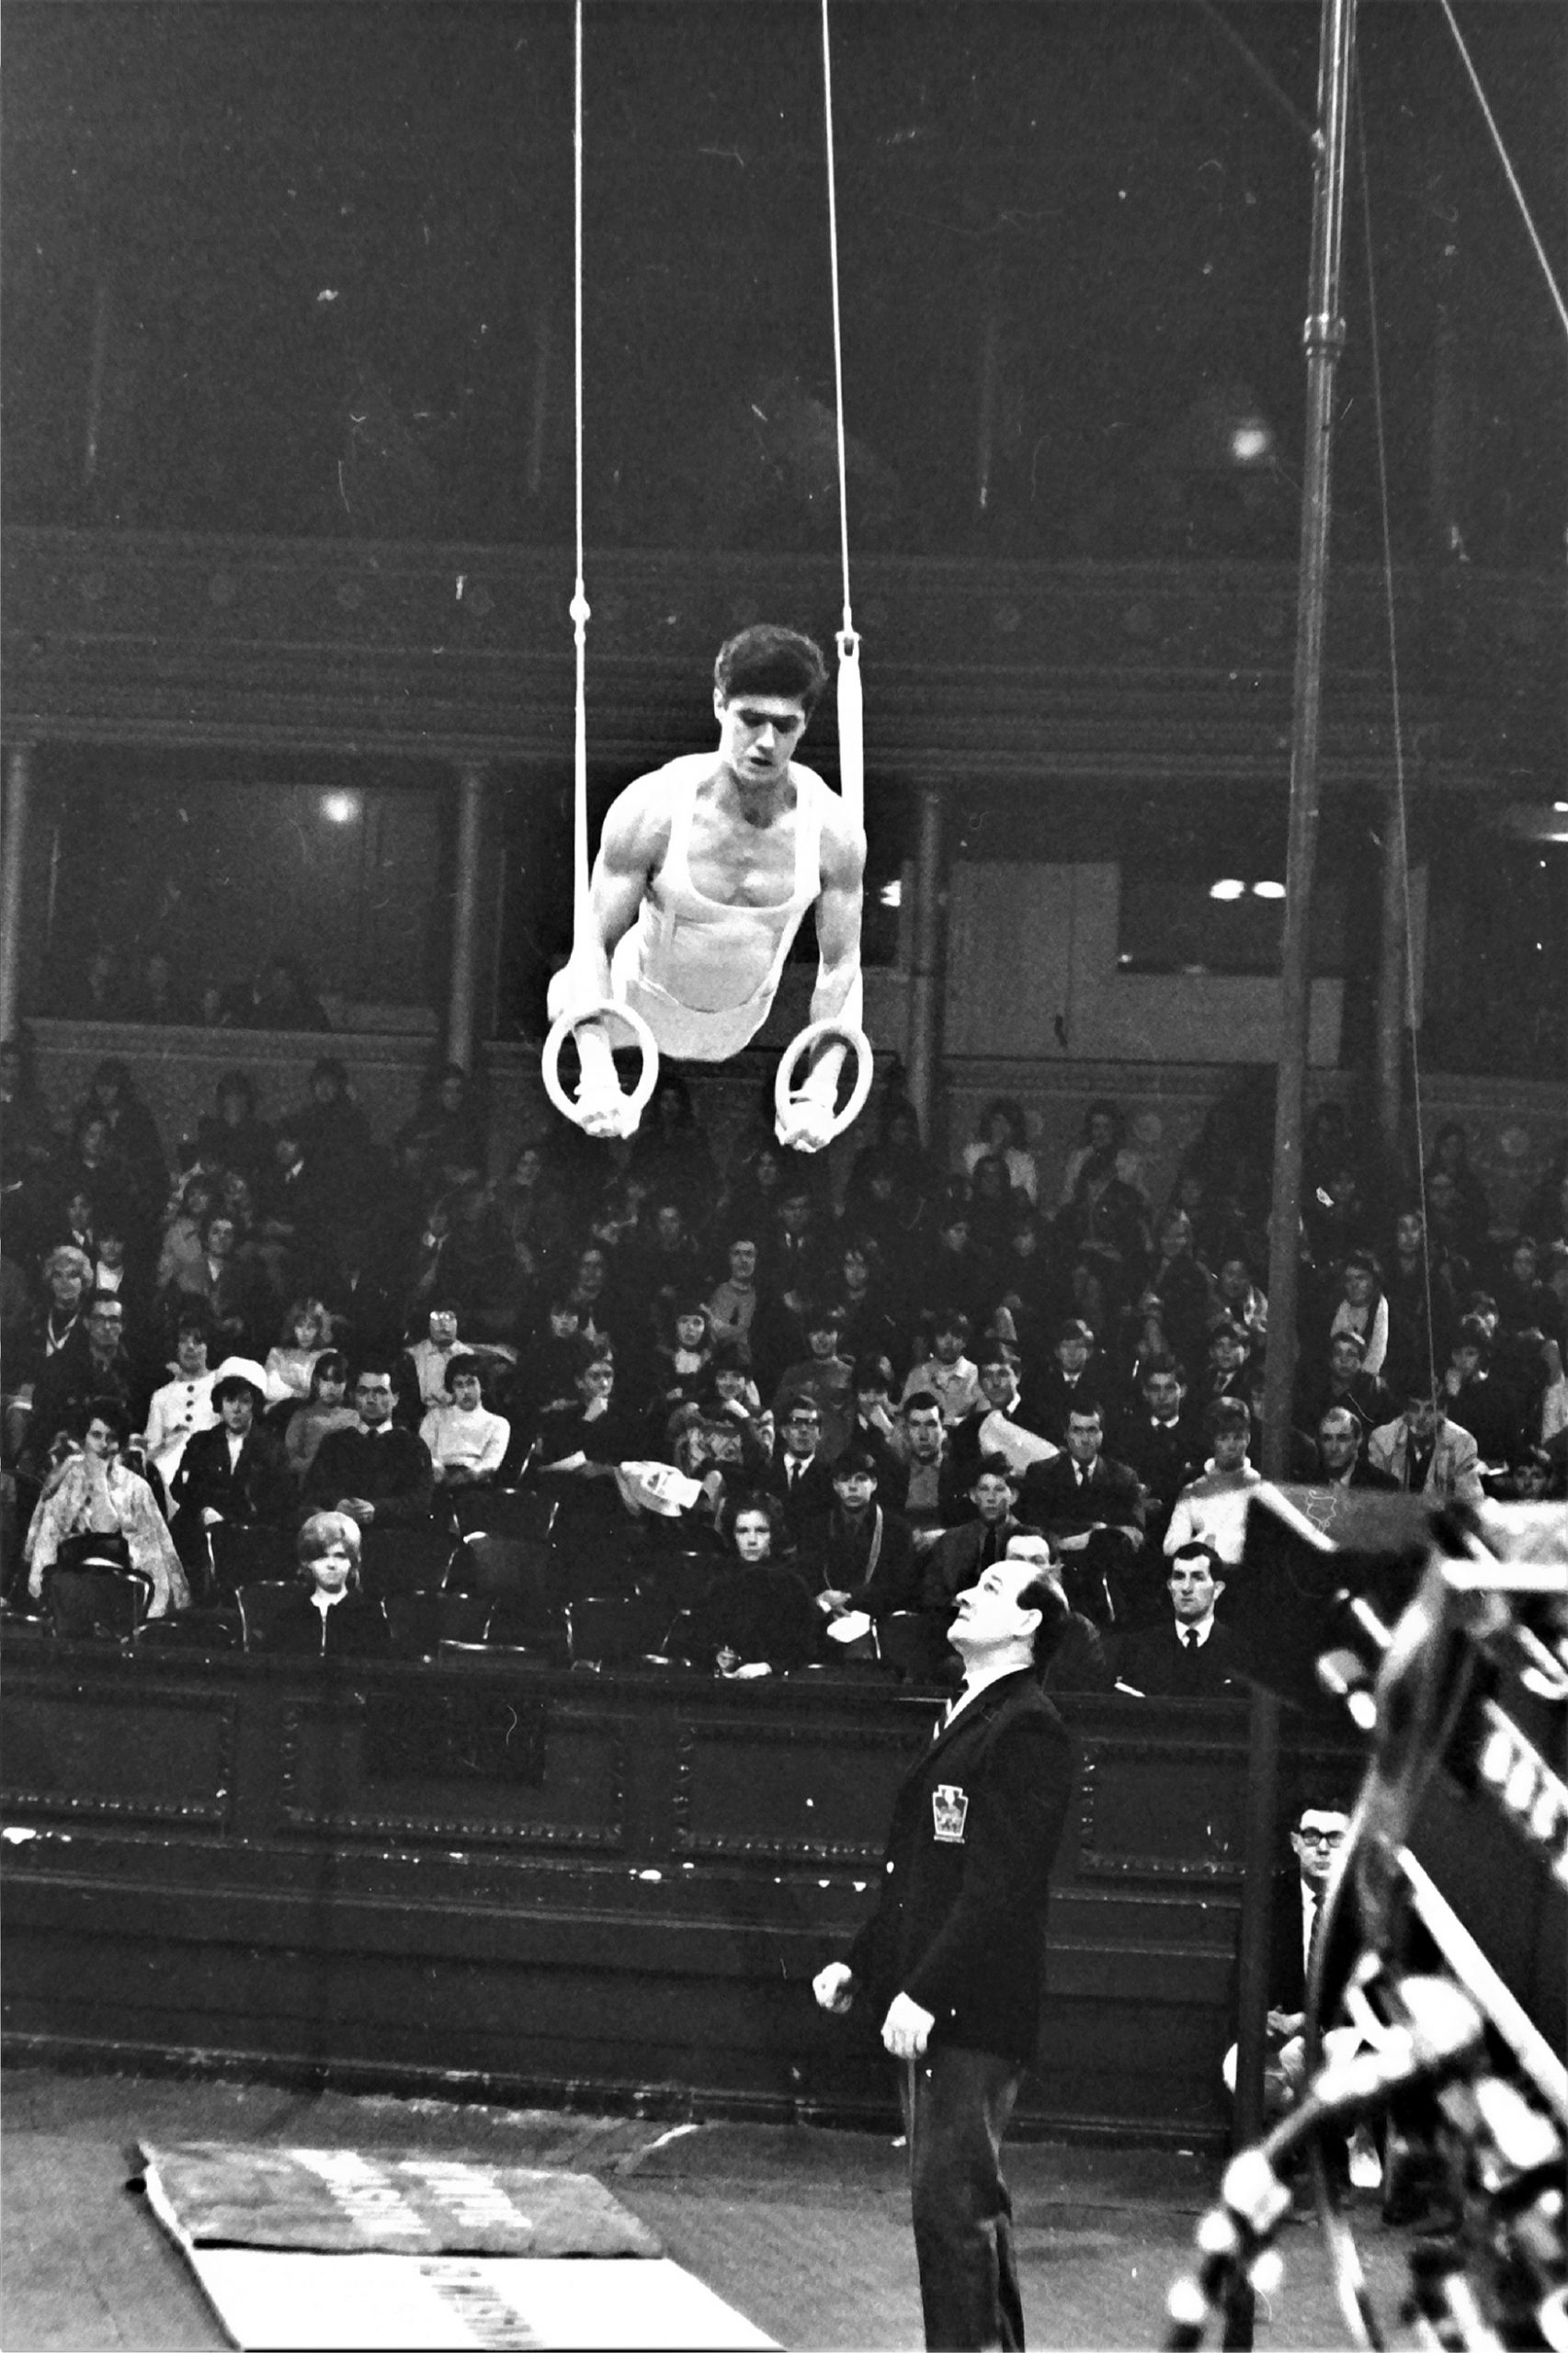 Mike Booth competing on Rings at the British Gymnastics Championships in 1966 with dad and coach Stan Booth standing by - Photo Alan Burrows